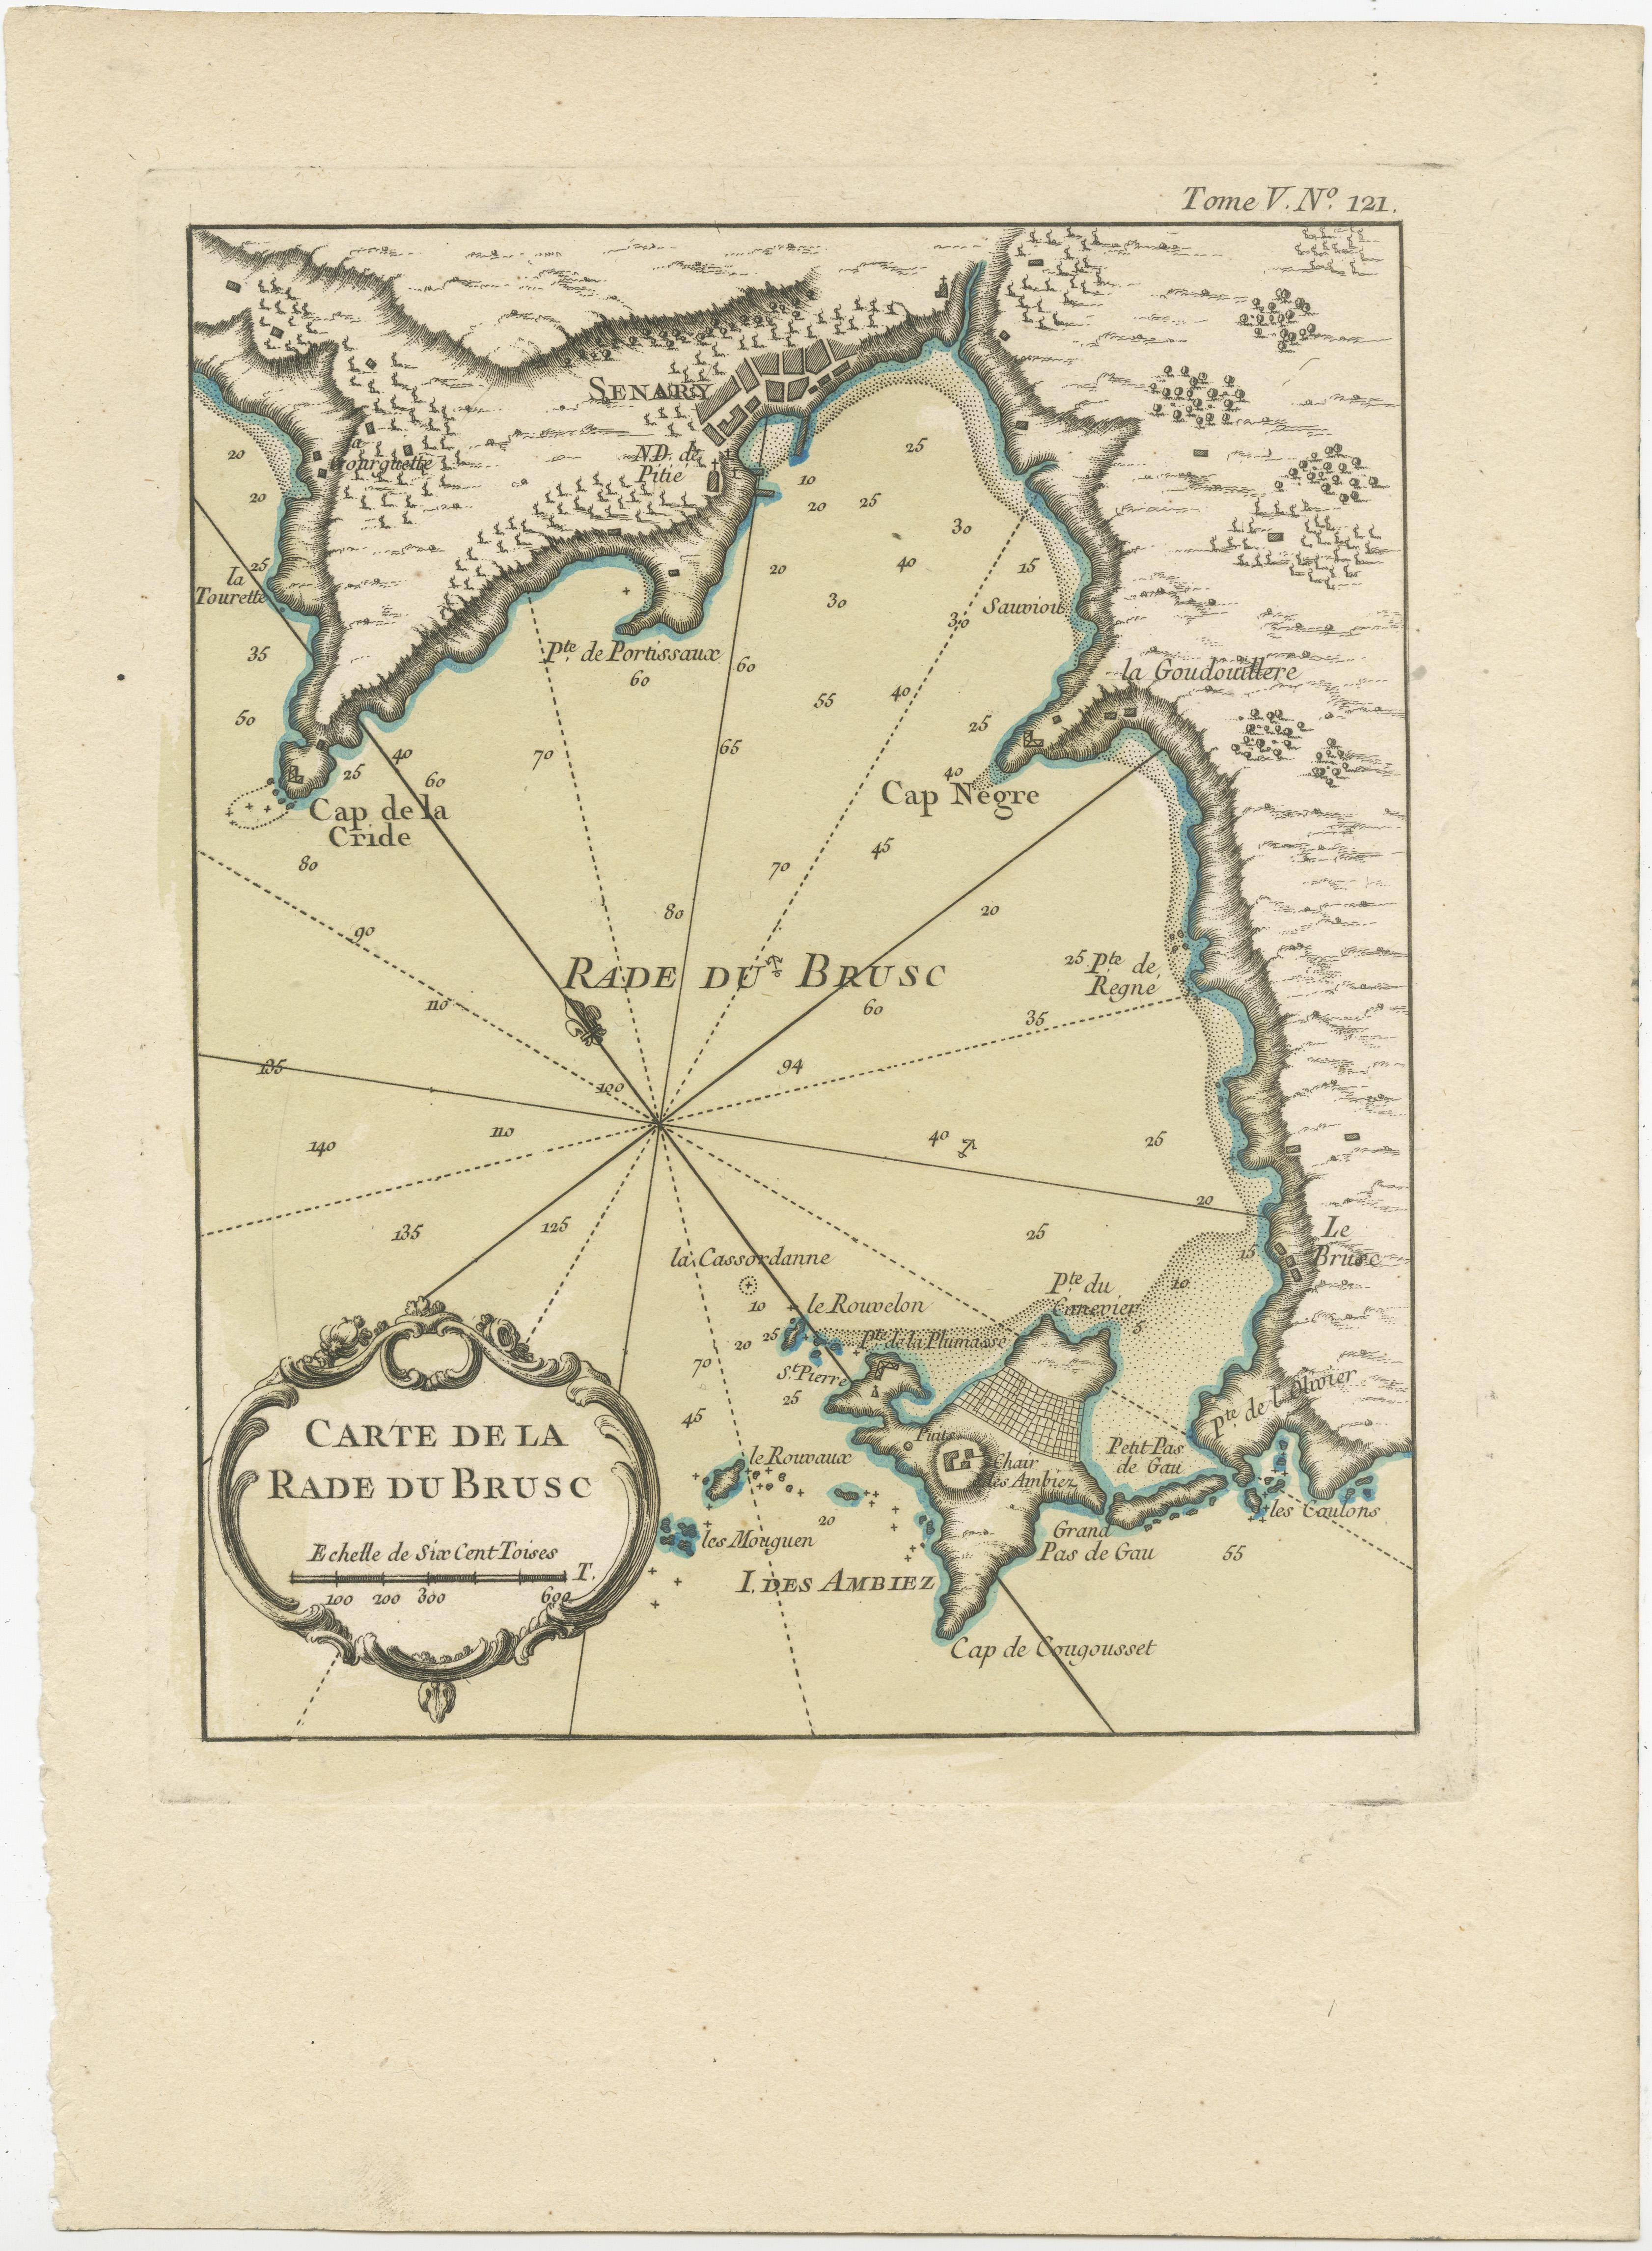 Antique map titled 'Carte de la rade du Brusc'. Original map of the bay of Brusc, France. This map originates from 'Le Petit Atlas Maritime (..)' by J.N. Bellin. Published 1764. 

Bellin was an important maker of charts for the French Depot de la